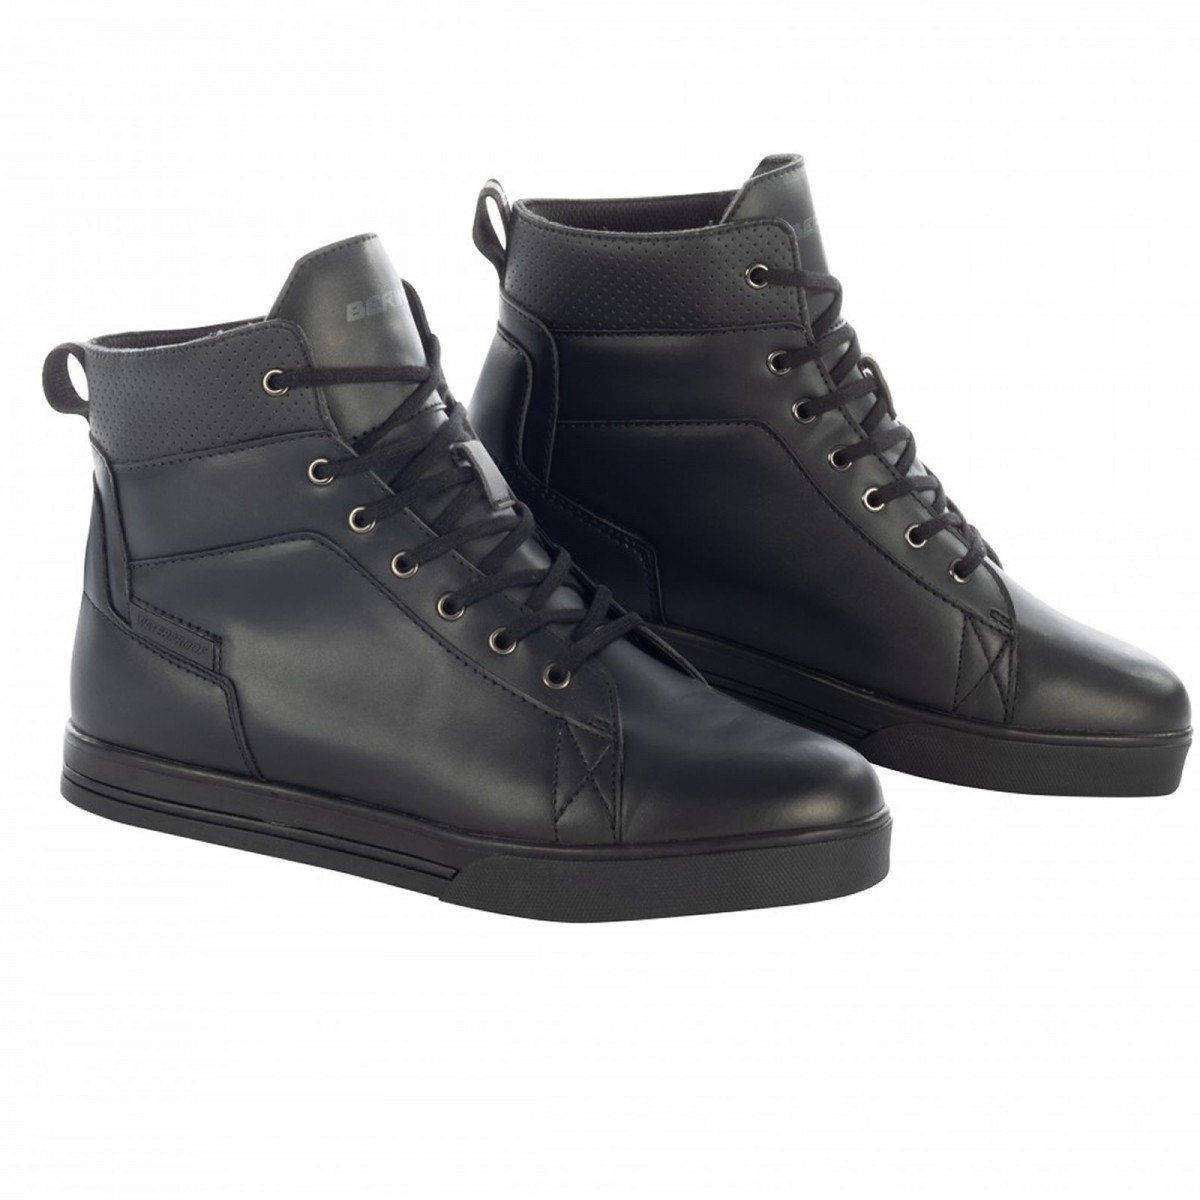 Image of EU Bering Indy Noir Chaussures Taille 45